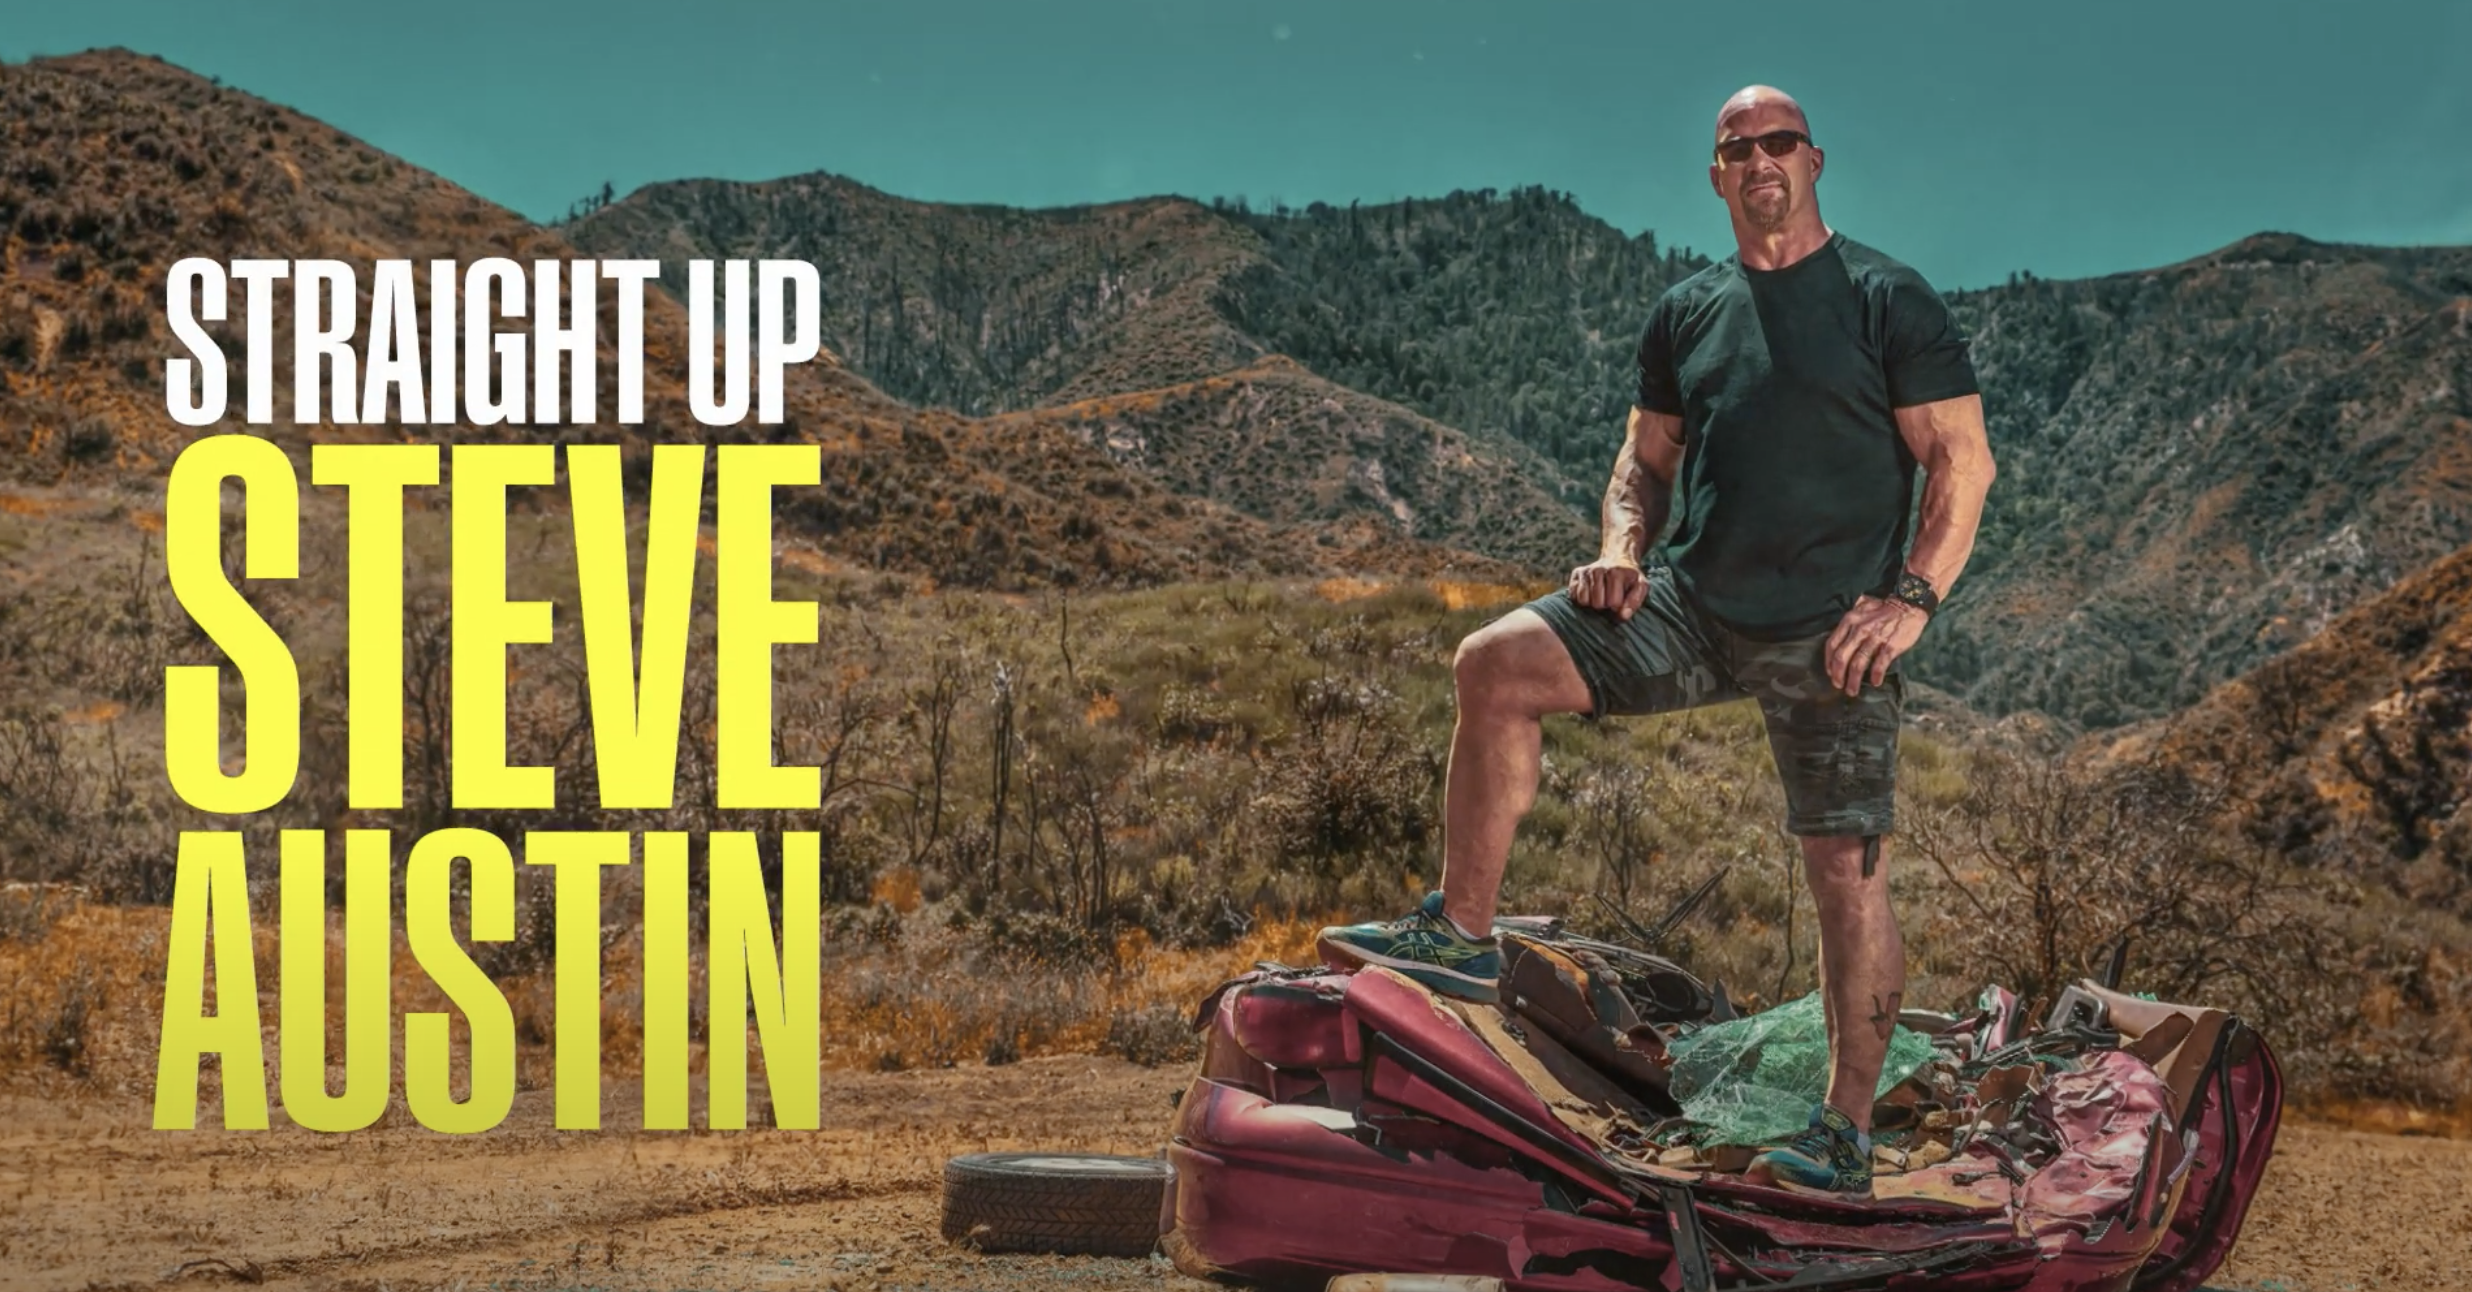 AddArmor Featured on ‘Straight Up Steve Austin’ | THE SHOP